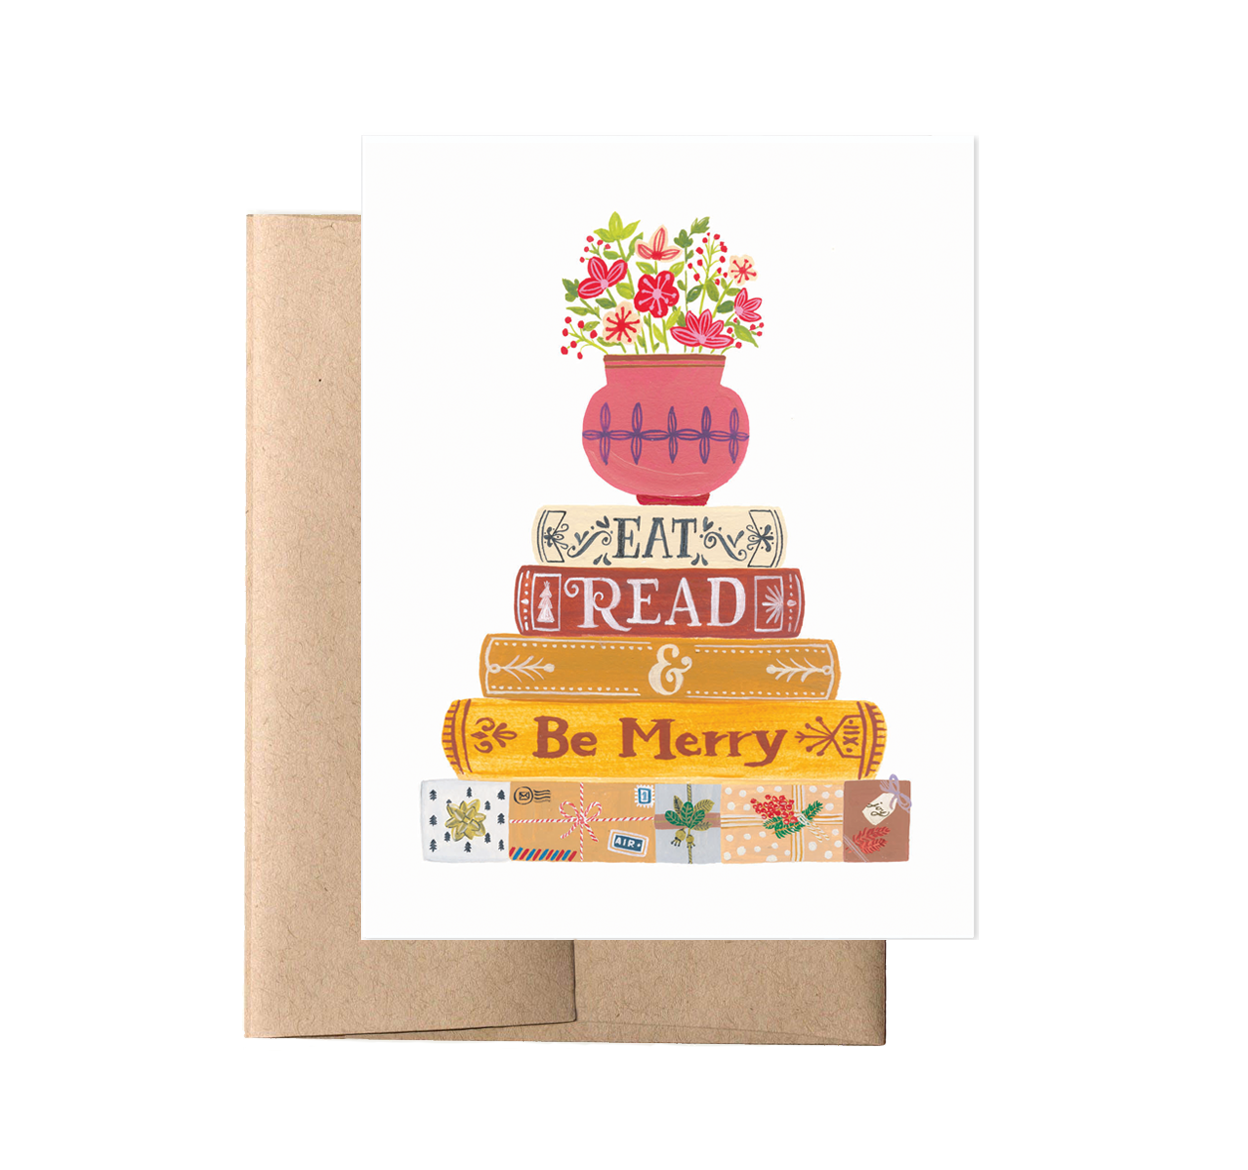 Eat, Read & Be Merry